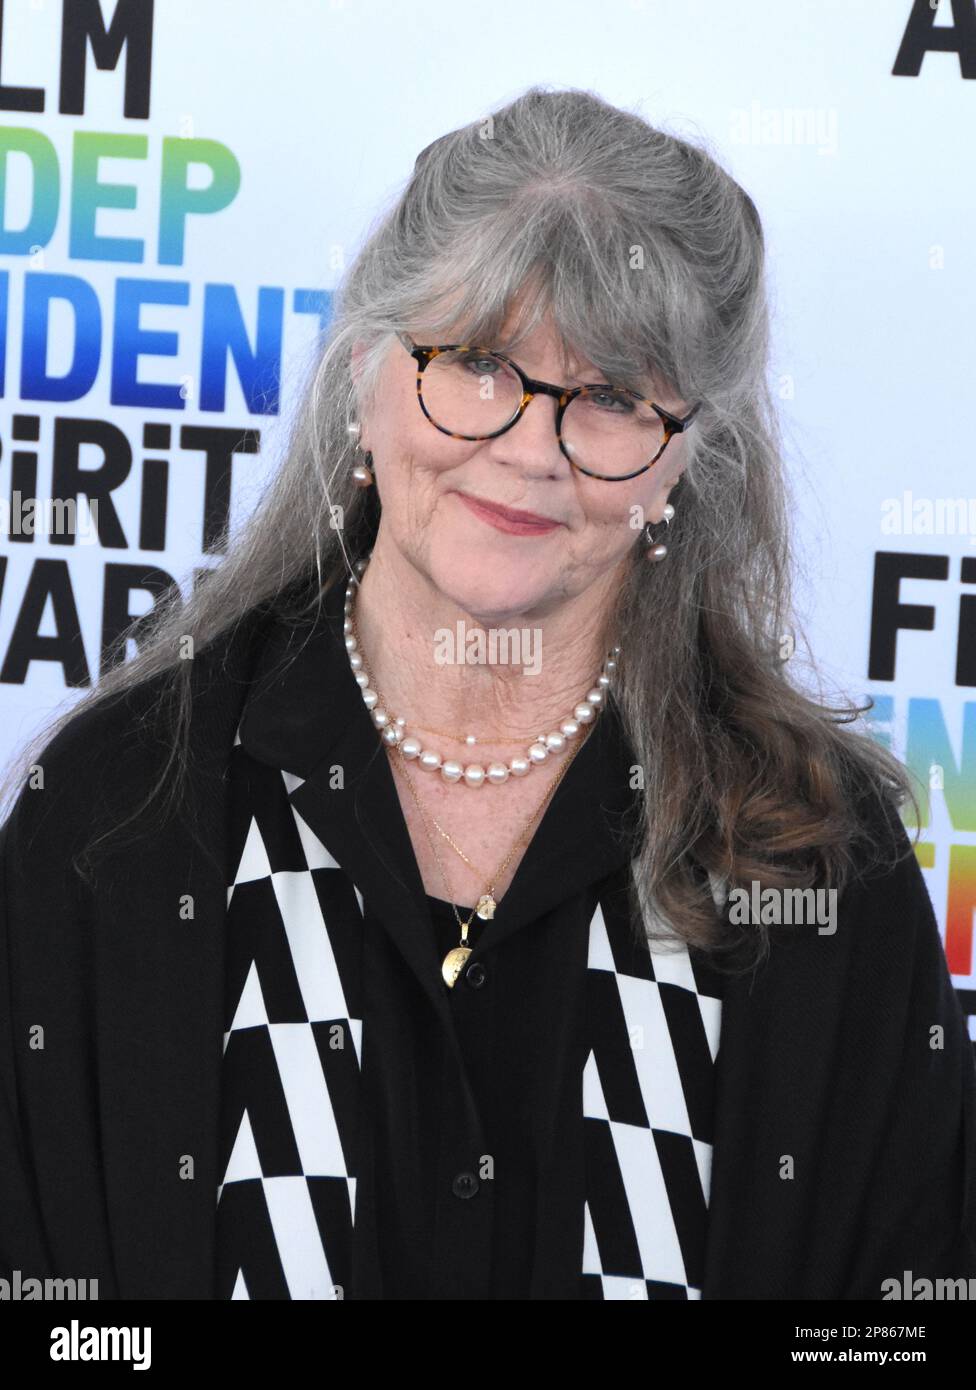 Santa Monica, California, USA 4th March 2023 Actress Judith Ivey attends the 2023 Film Independent Spirit Awards on March 4, 2023 at Santa Mlonica Beach in Santa Monica, California, USA. Photo by Barry King/Alamy Stock Photo Stock Photo